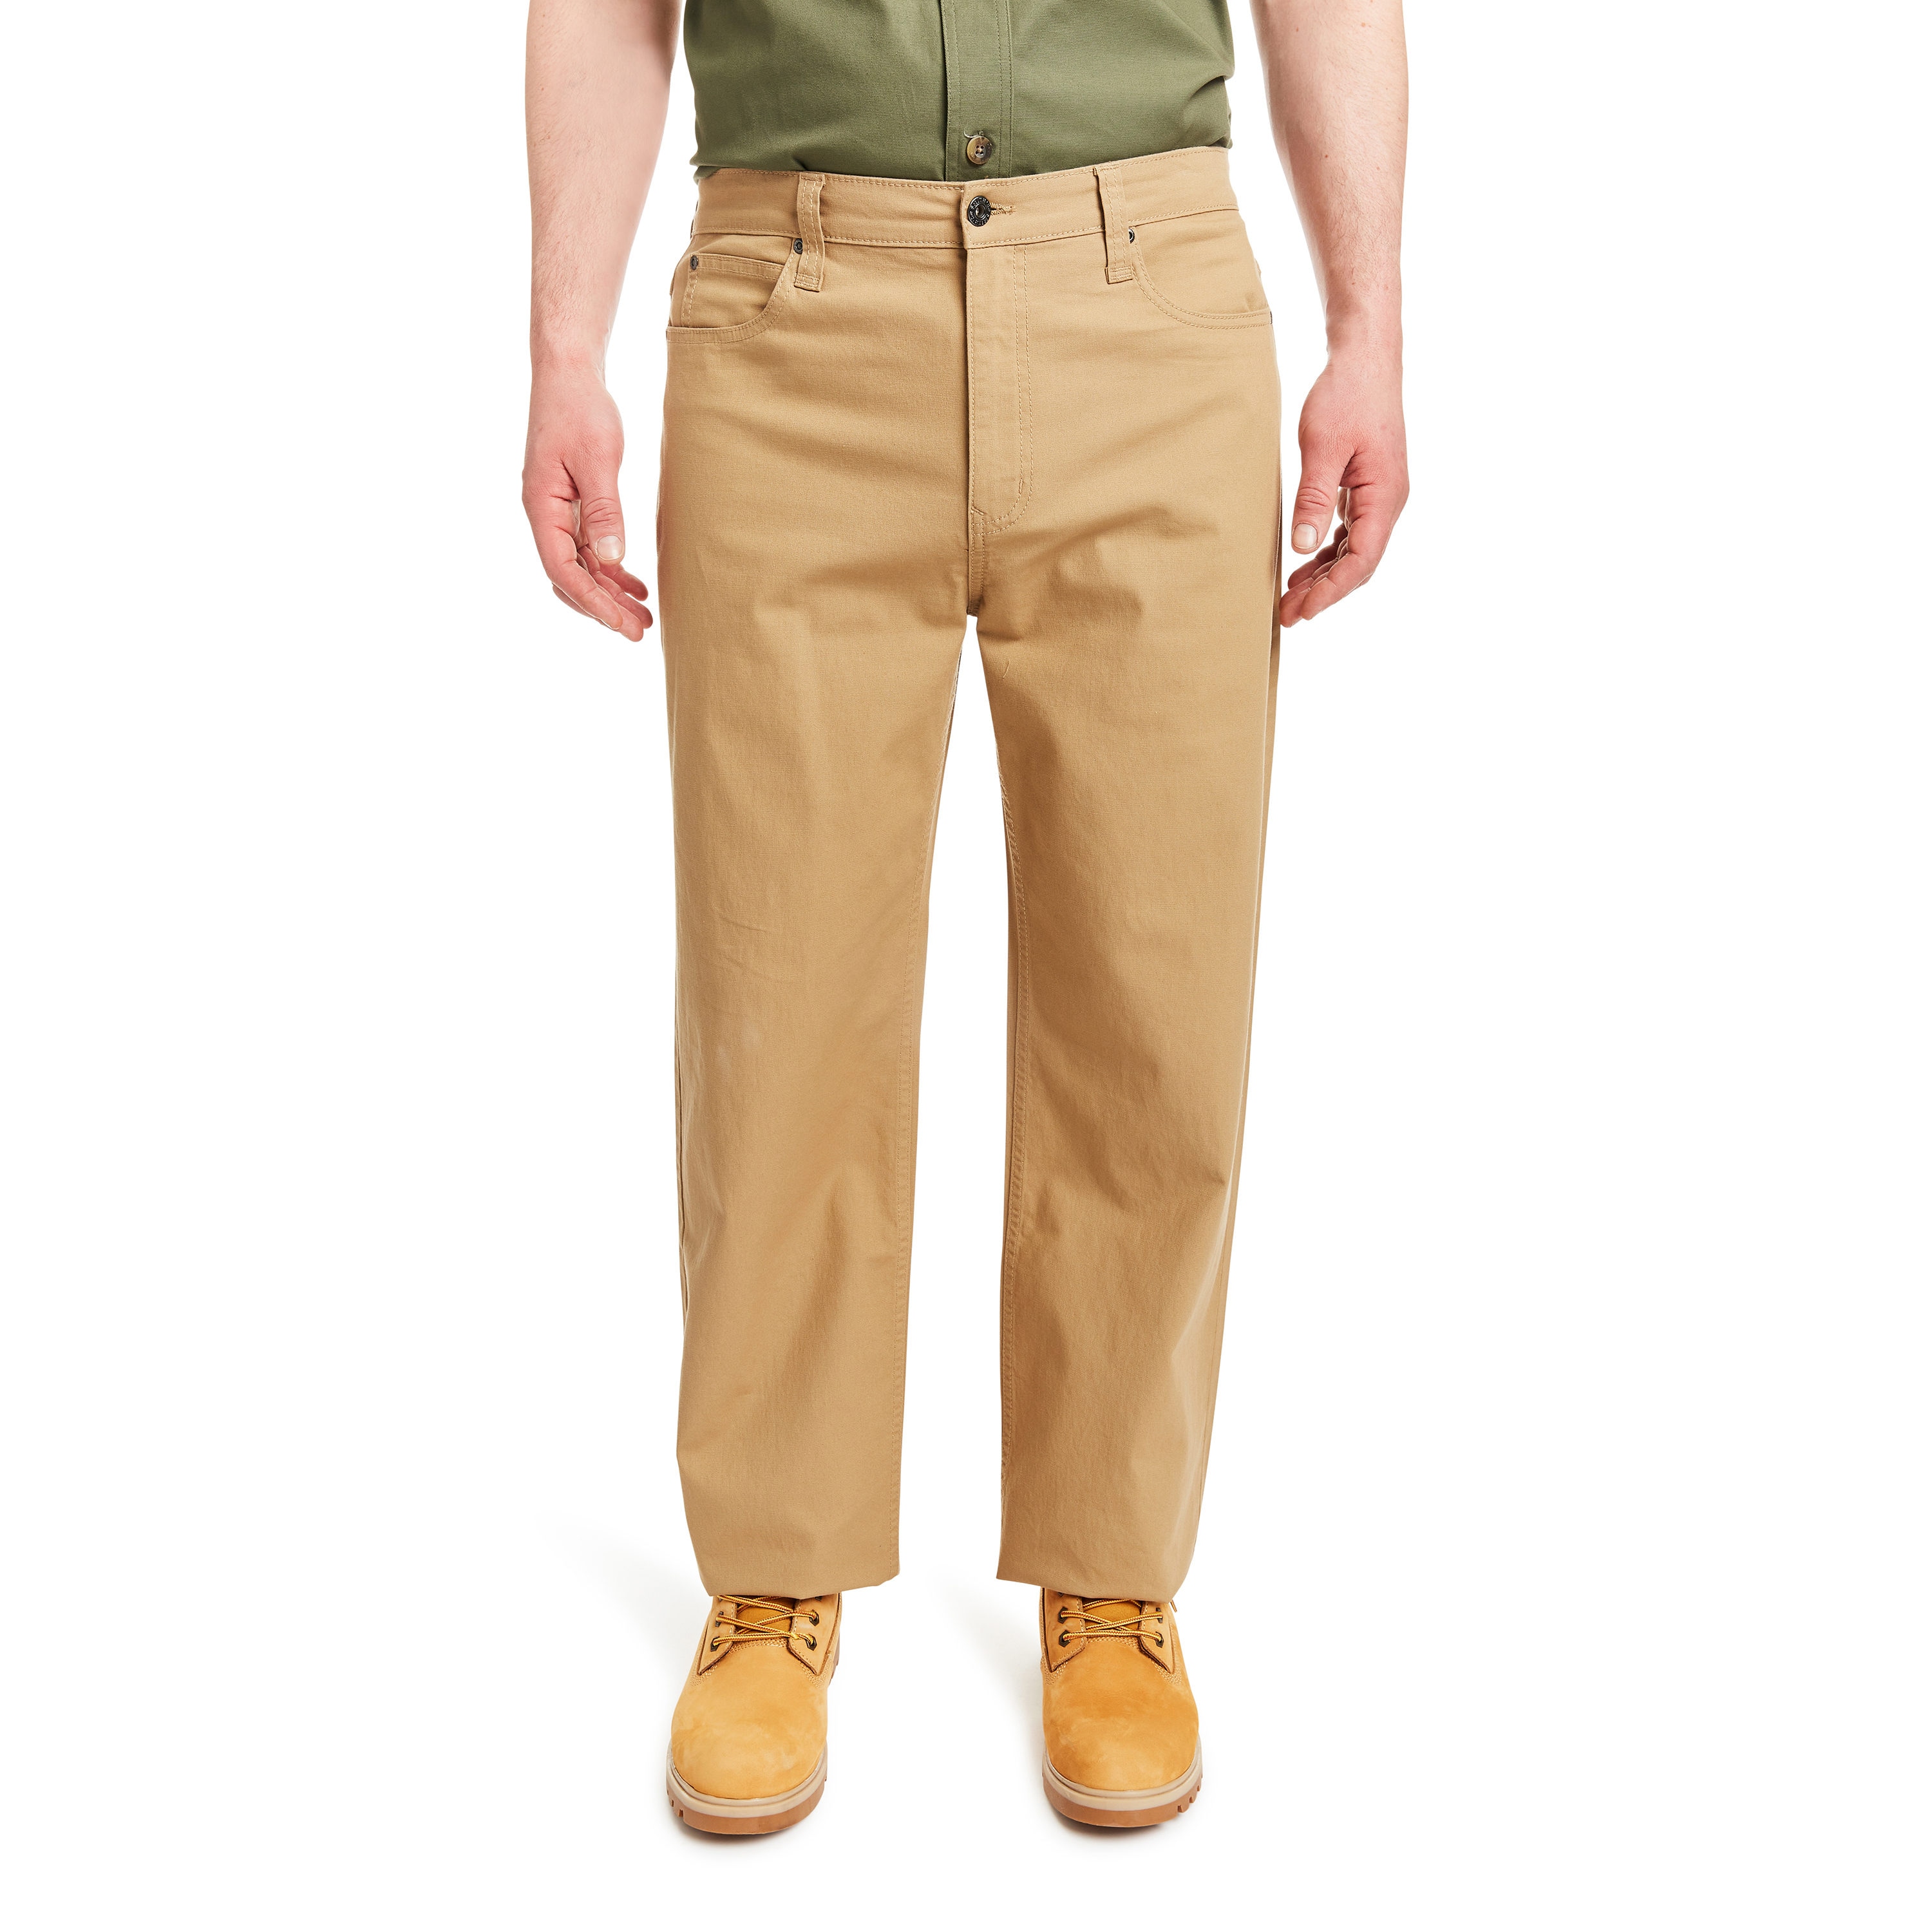 Smith's Workwear Men's Relaxed Fit Khaki Stretch Canvas Work Pants